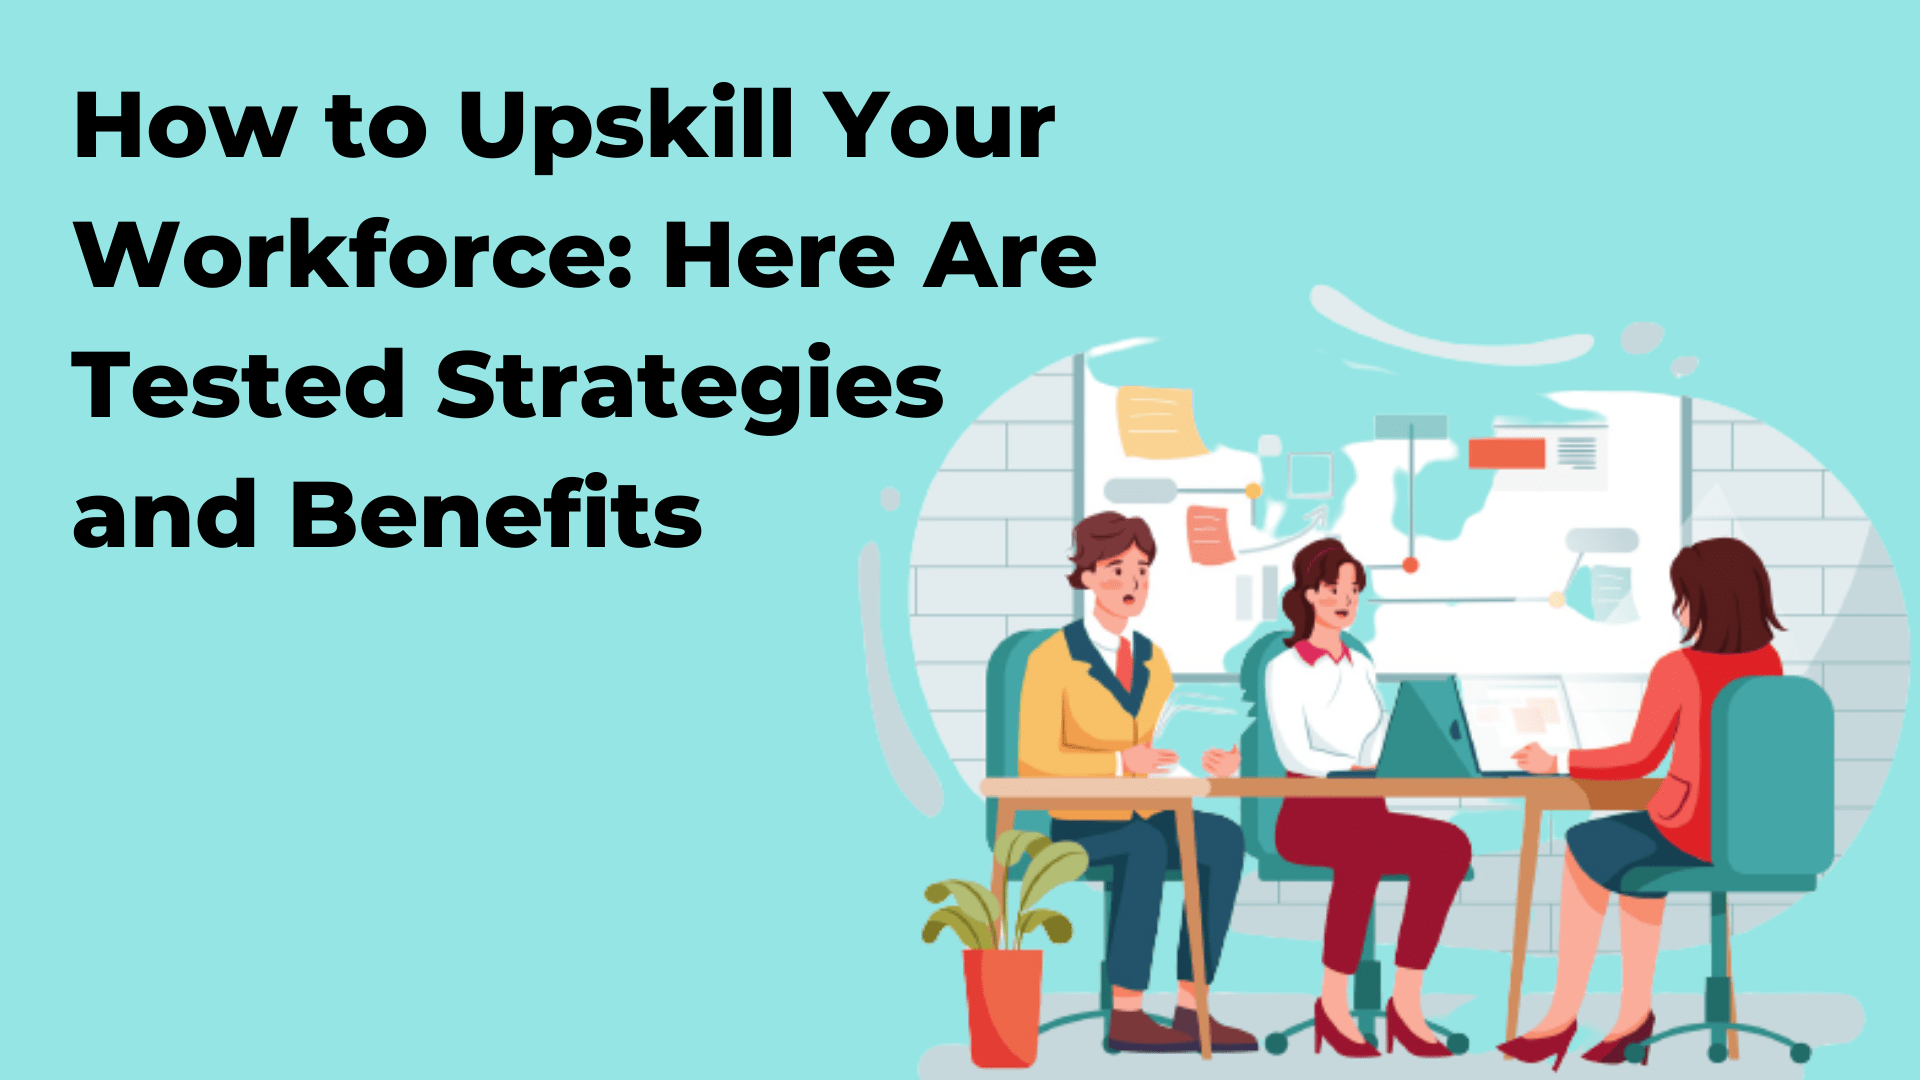 How To Upskill Your Workforce: Here Are Tested Strategies and Benefits